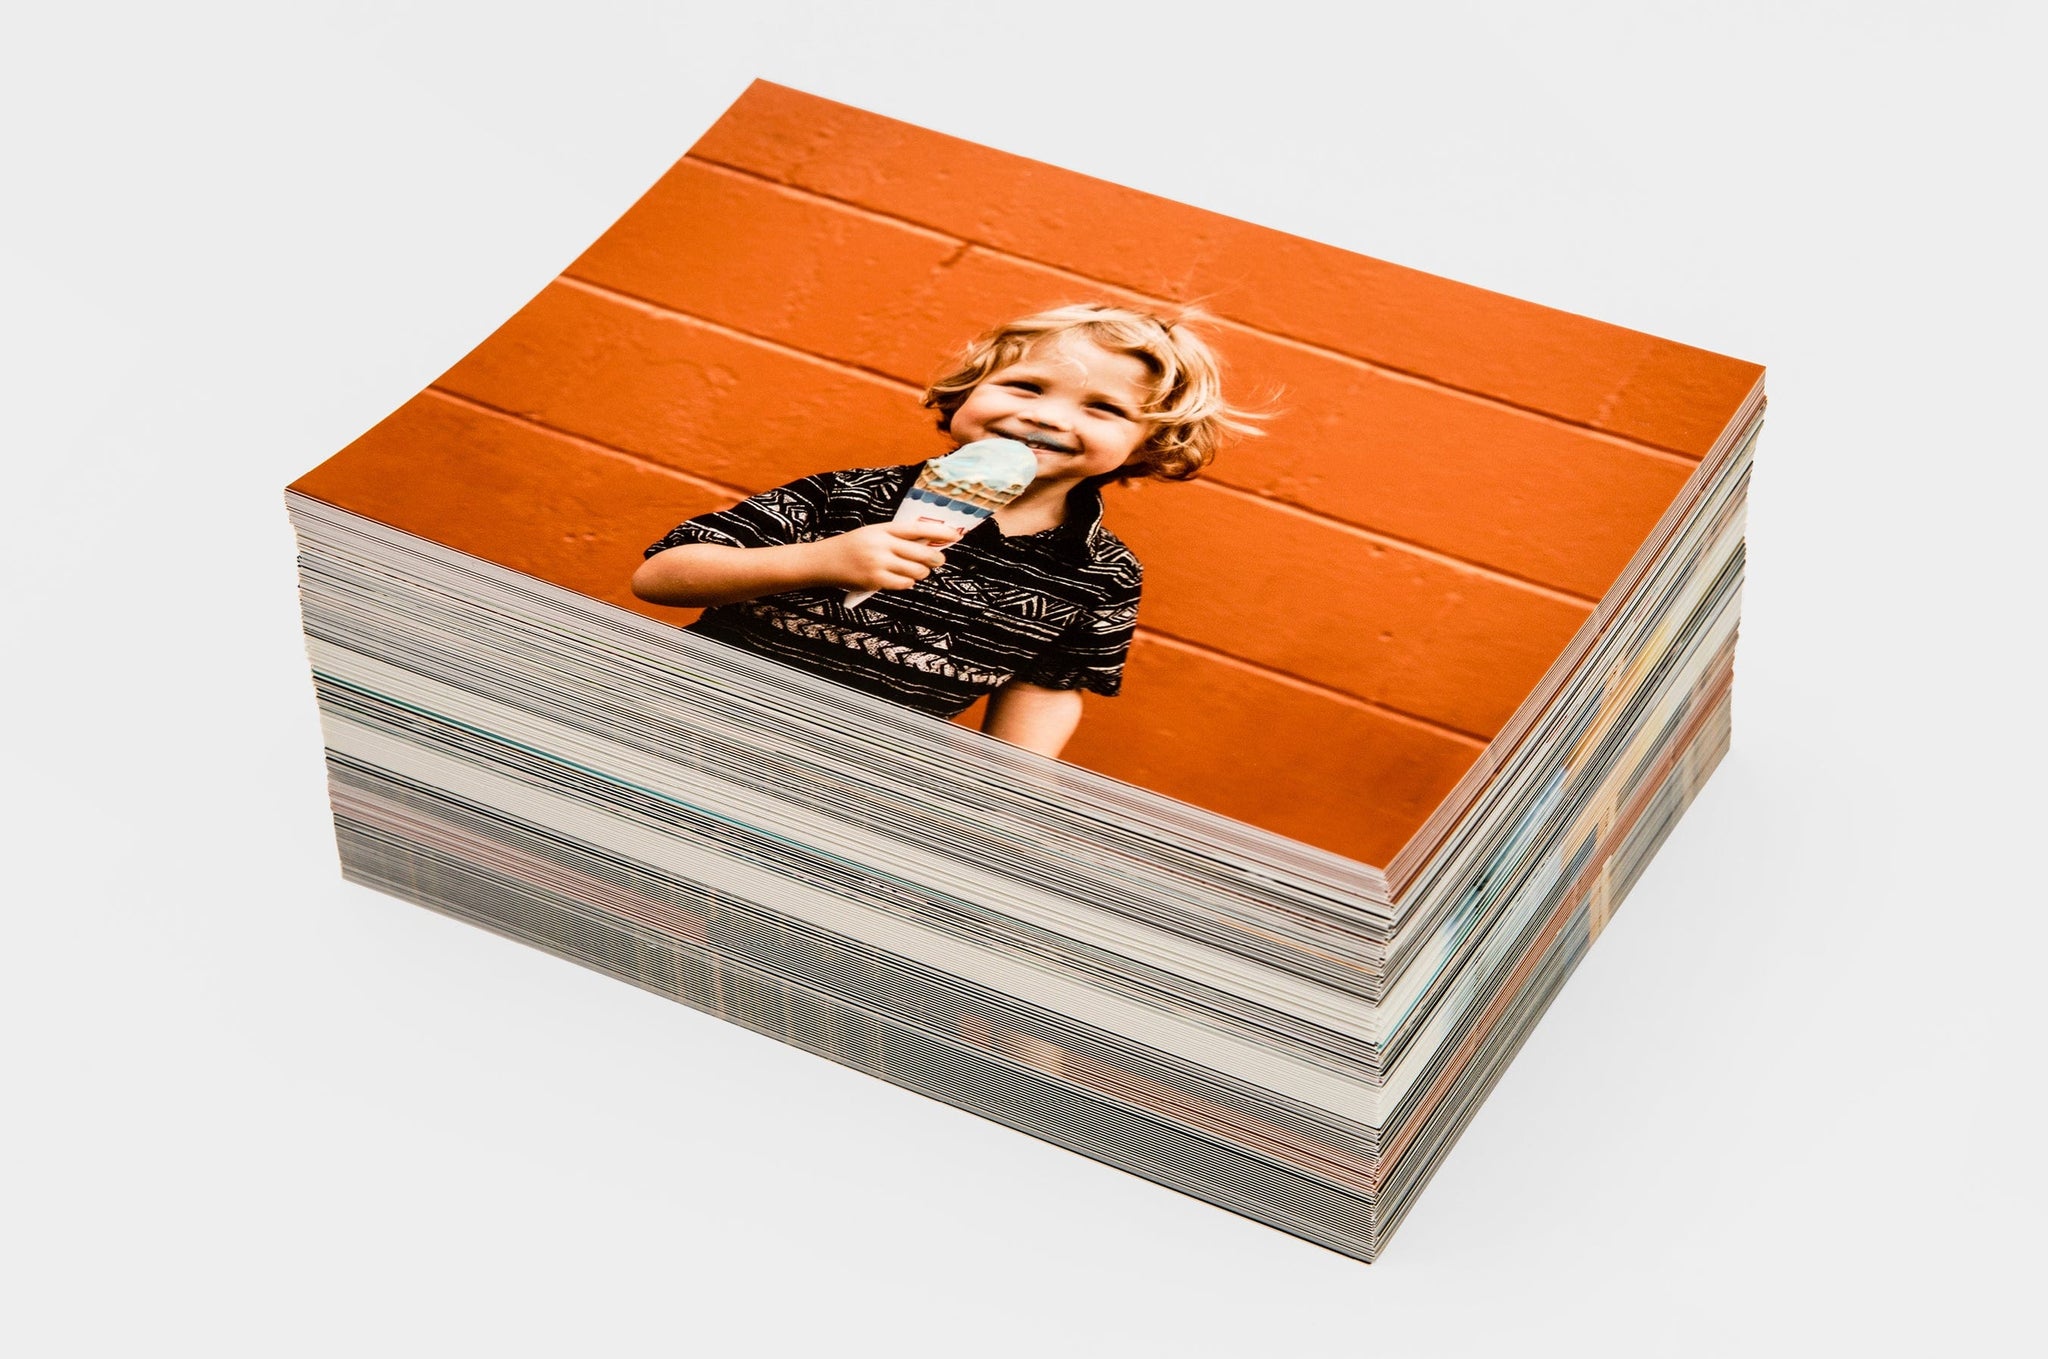 Large stack of 5x7" Volume Photo Prints, the top photo features a picture of a boy with ice cream.